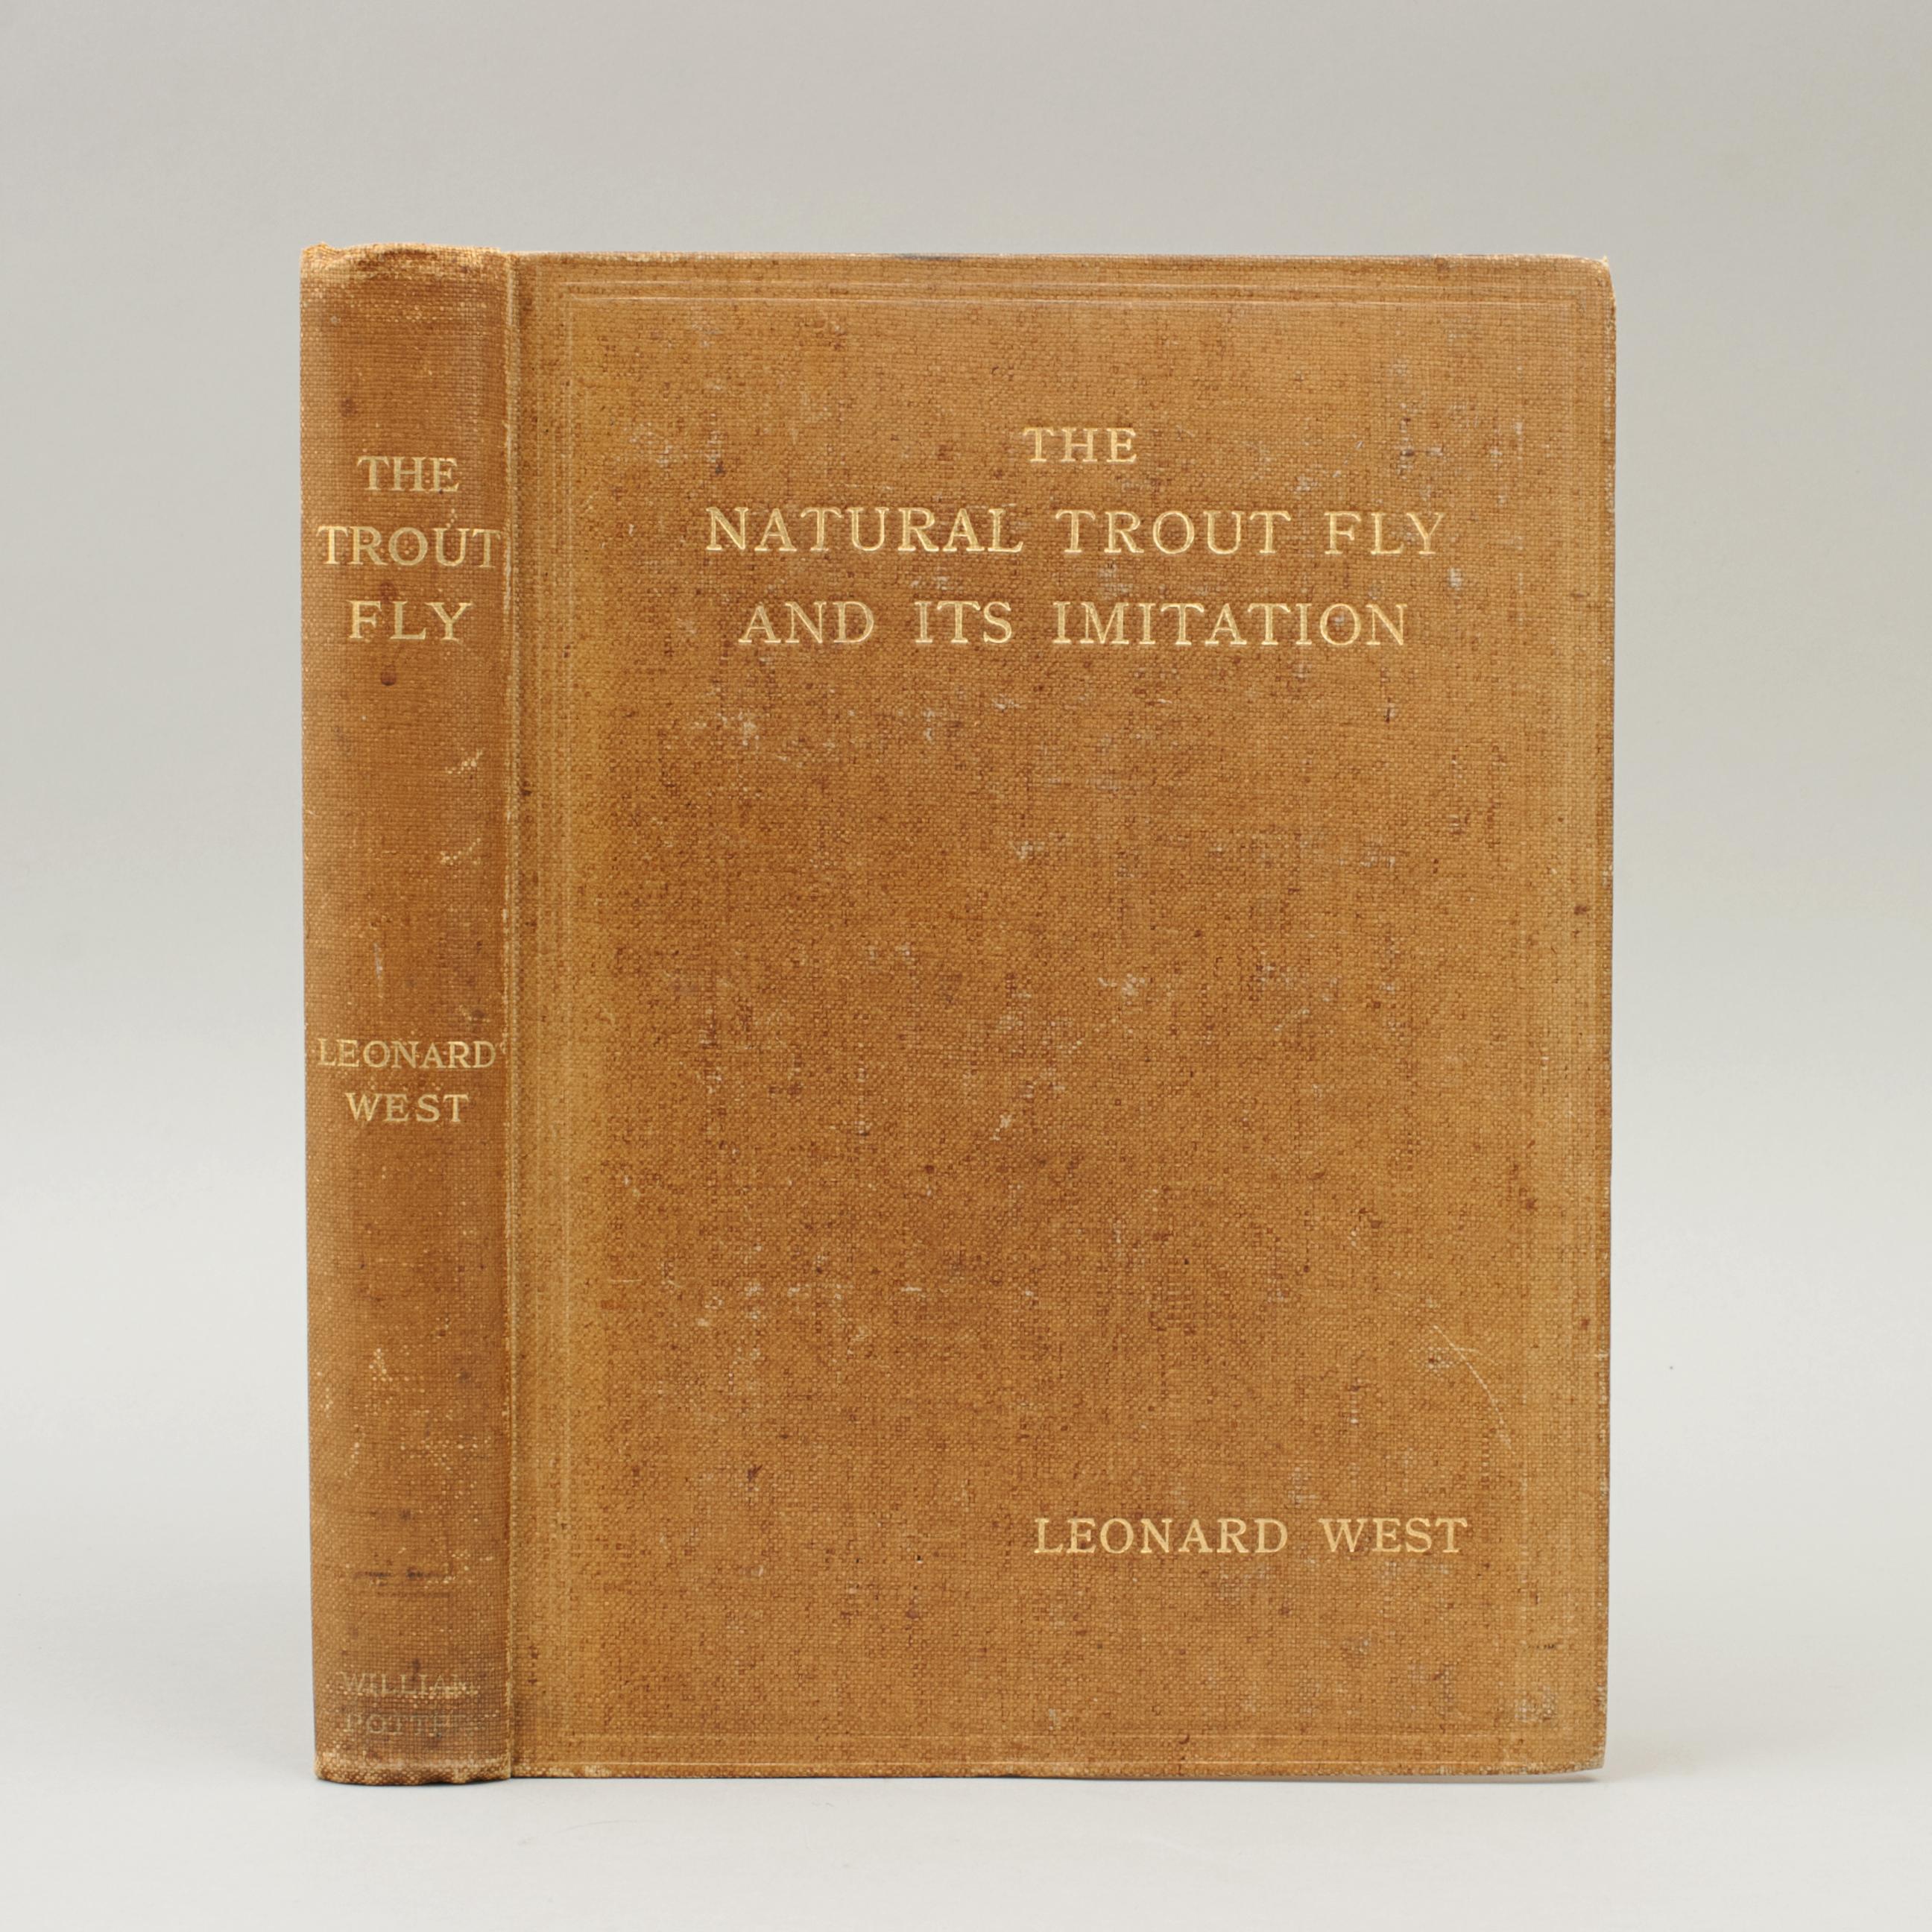 Vintage fishing book, The Natural Trout Fly And Its Imitation By Leonard West.
A 2nd edition angling book by Leonard West entitled 'The Natural Trout Fly And Its Imitation' and published by William Potter, 30 Exchange Street East, Liverpool. This